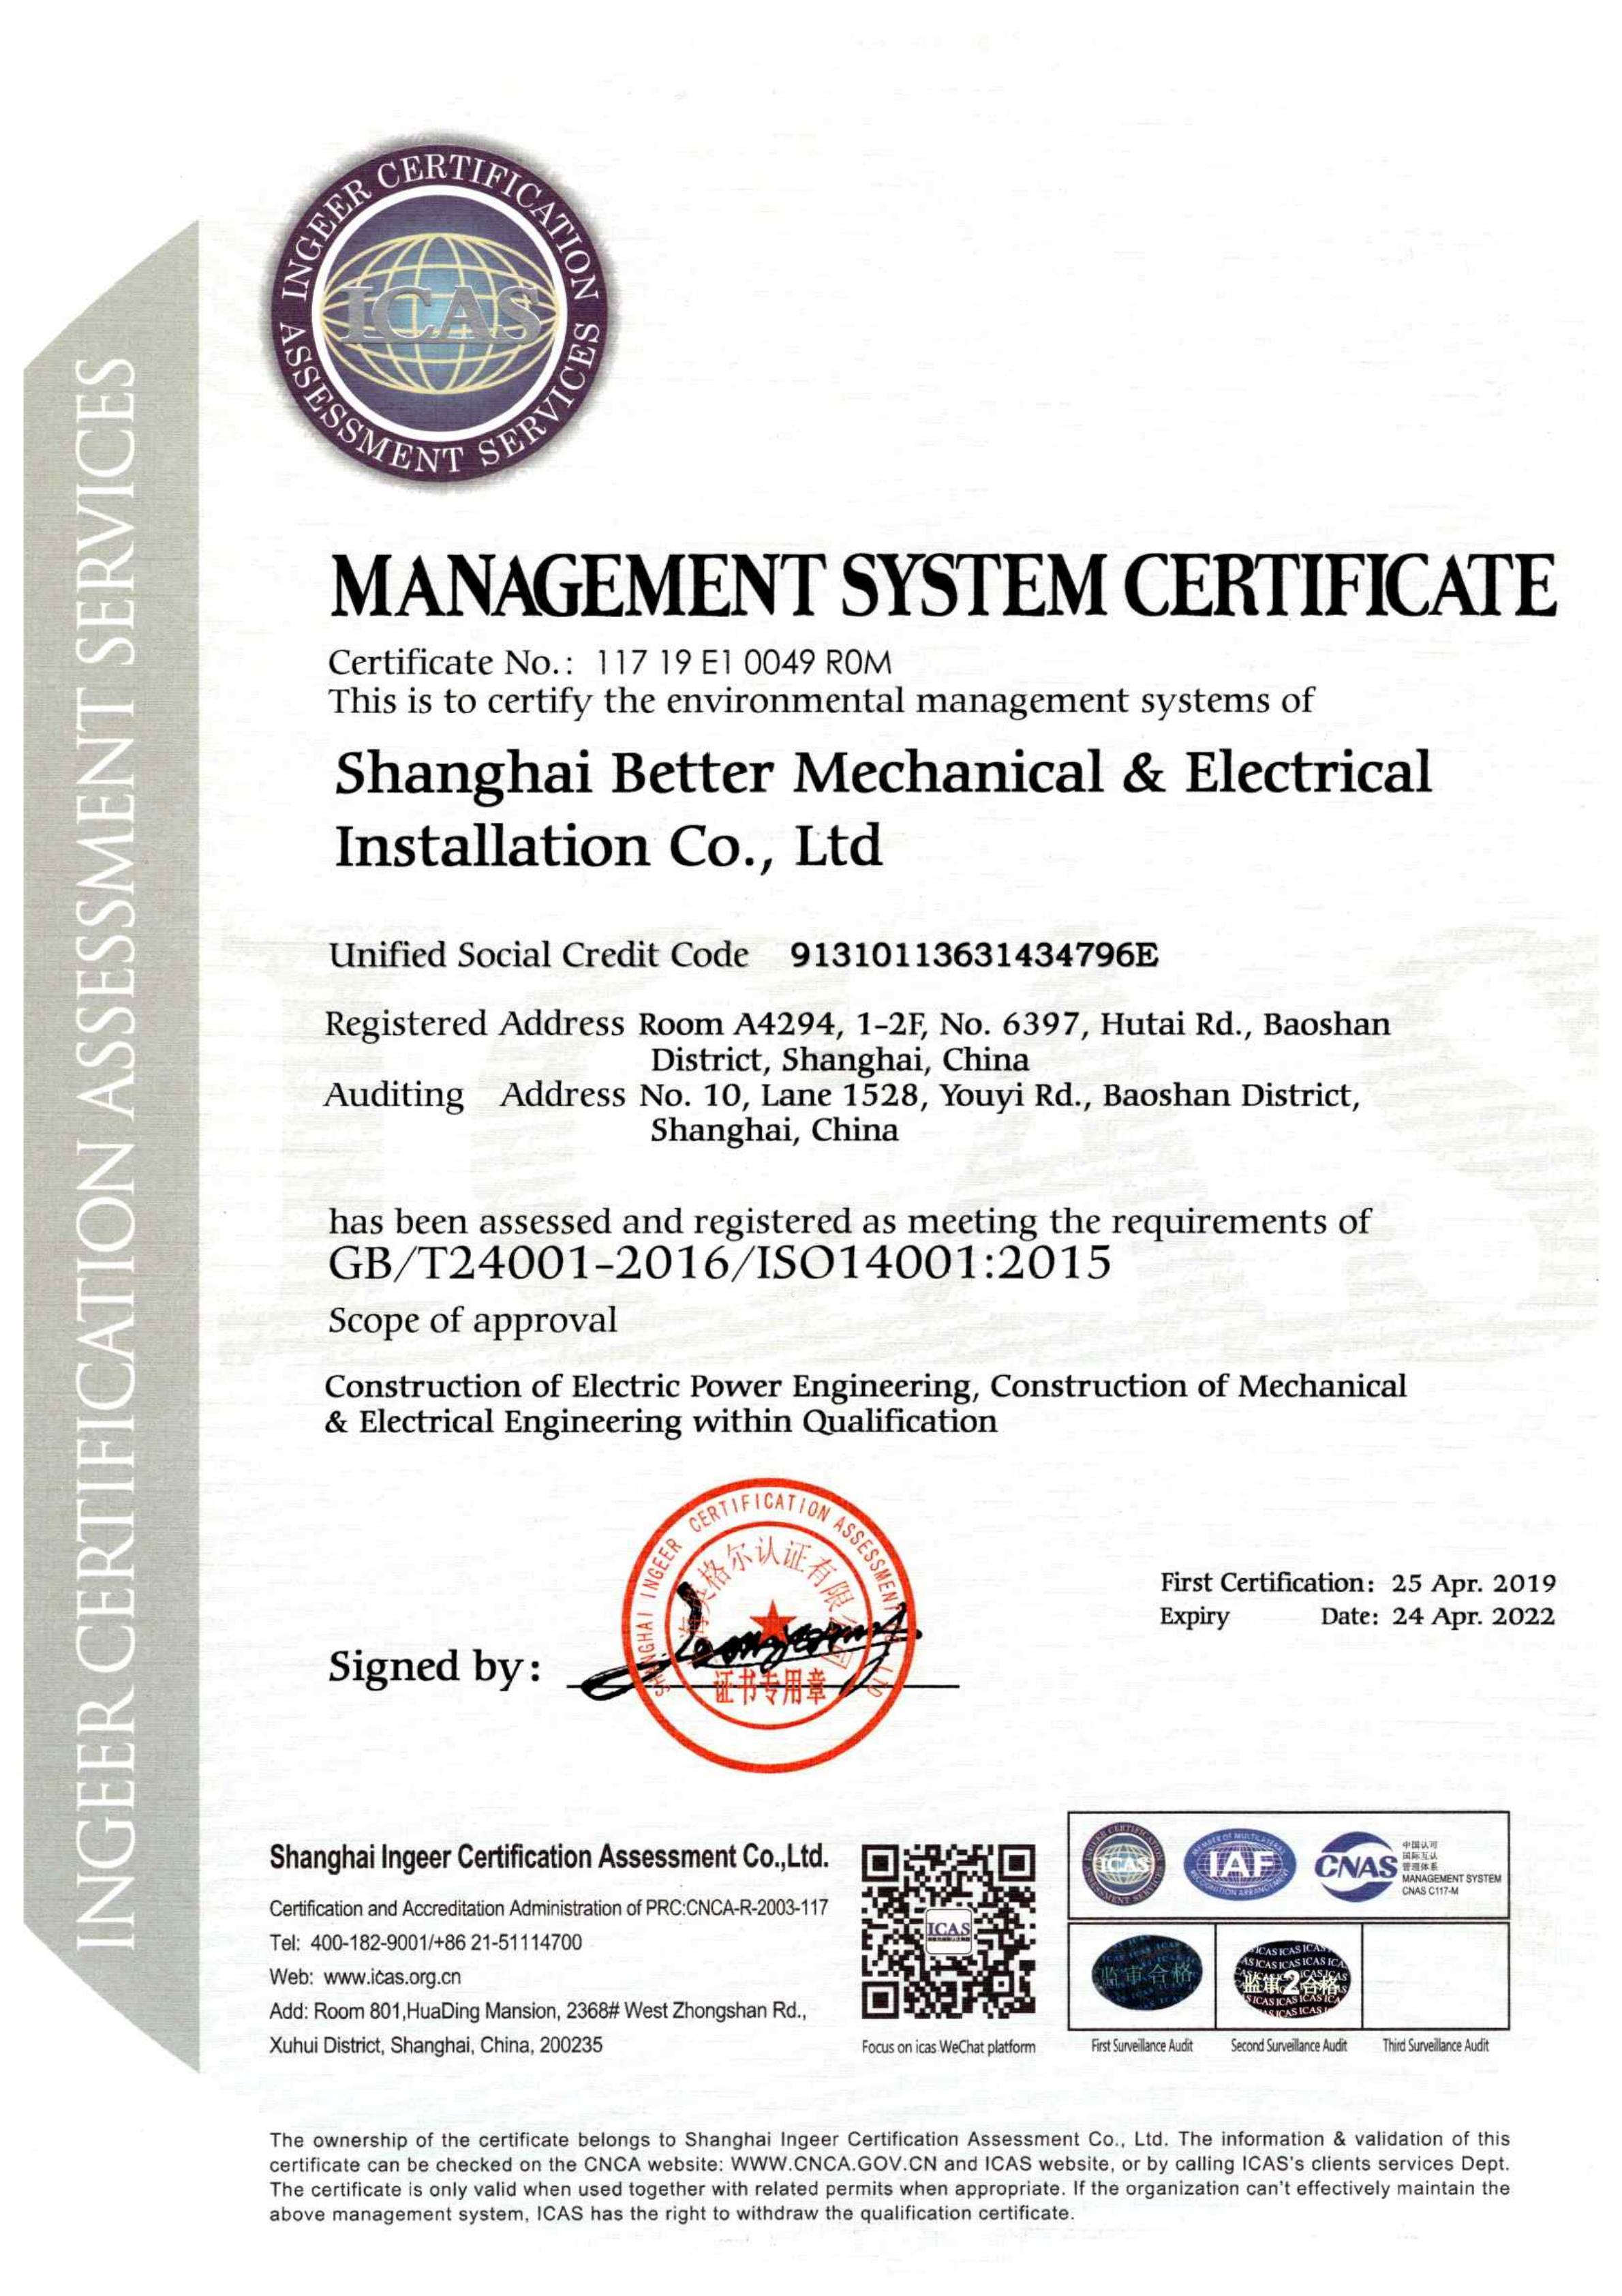 Management System Certificate - Environmental Management Requirements